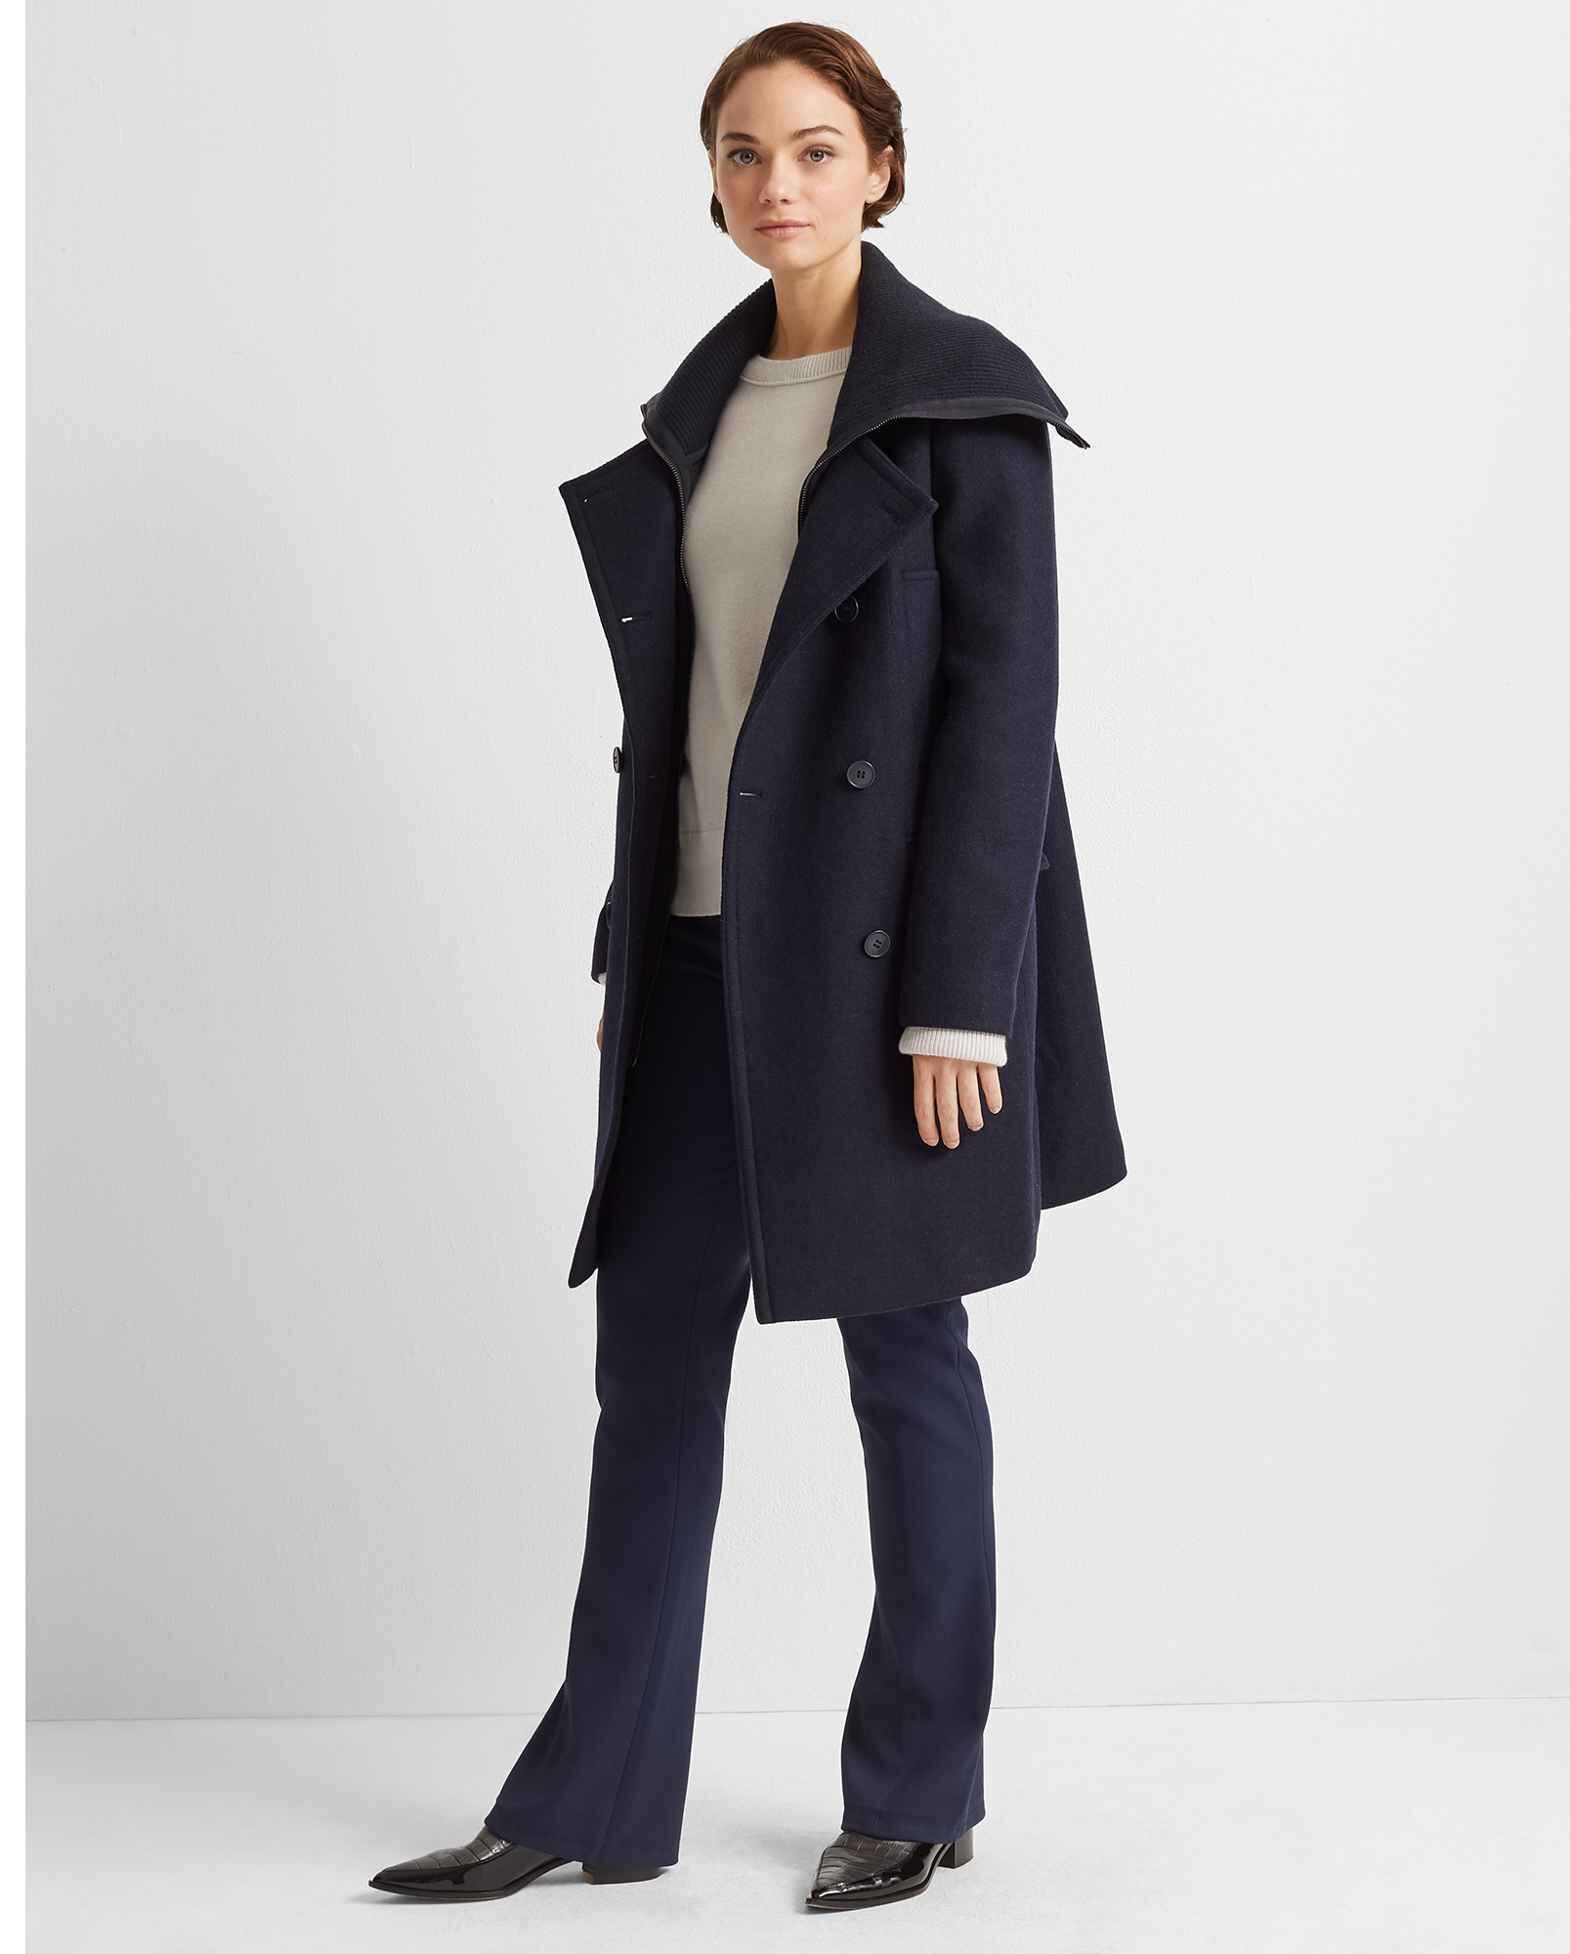 Style Guide: Eye-Catching Coats to Wear this Fall and Winter - SoCalPulse